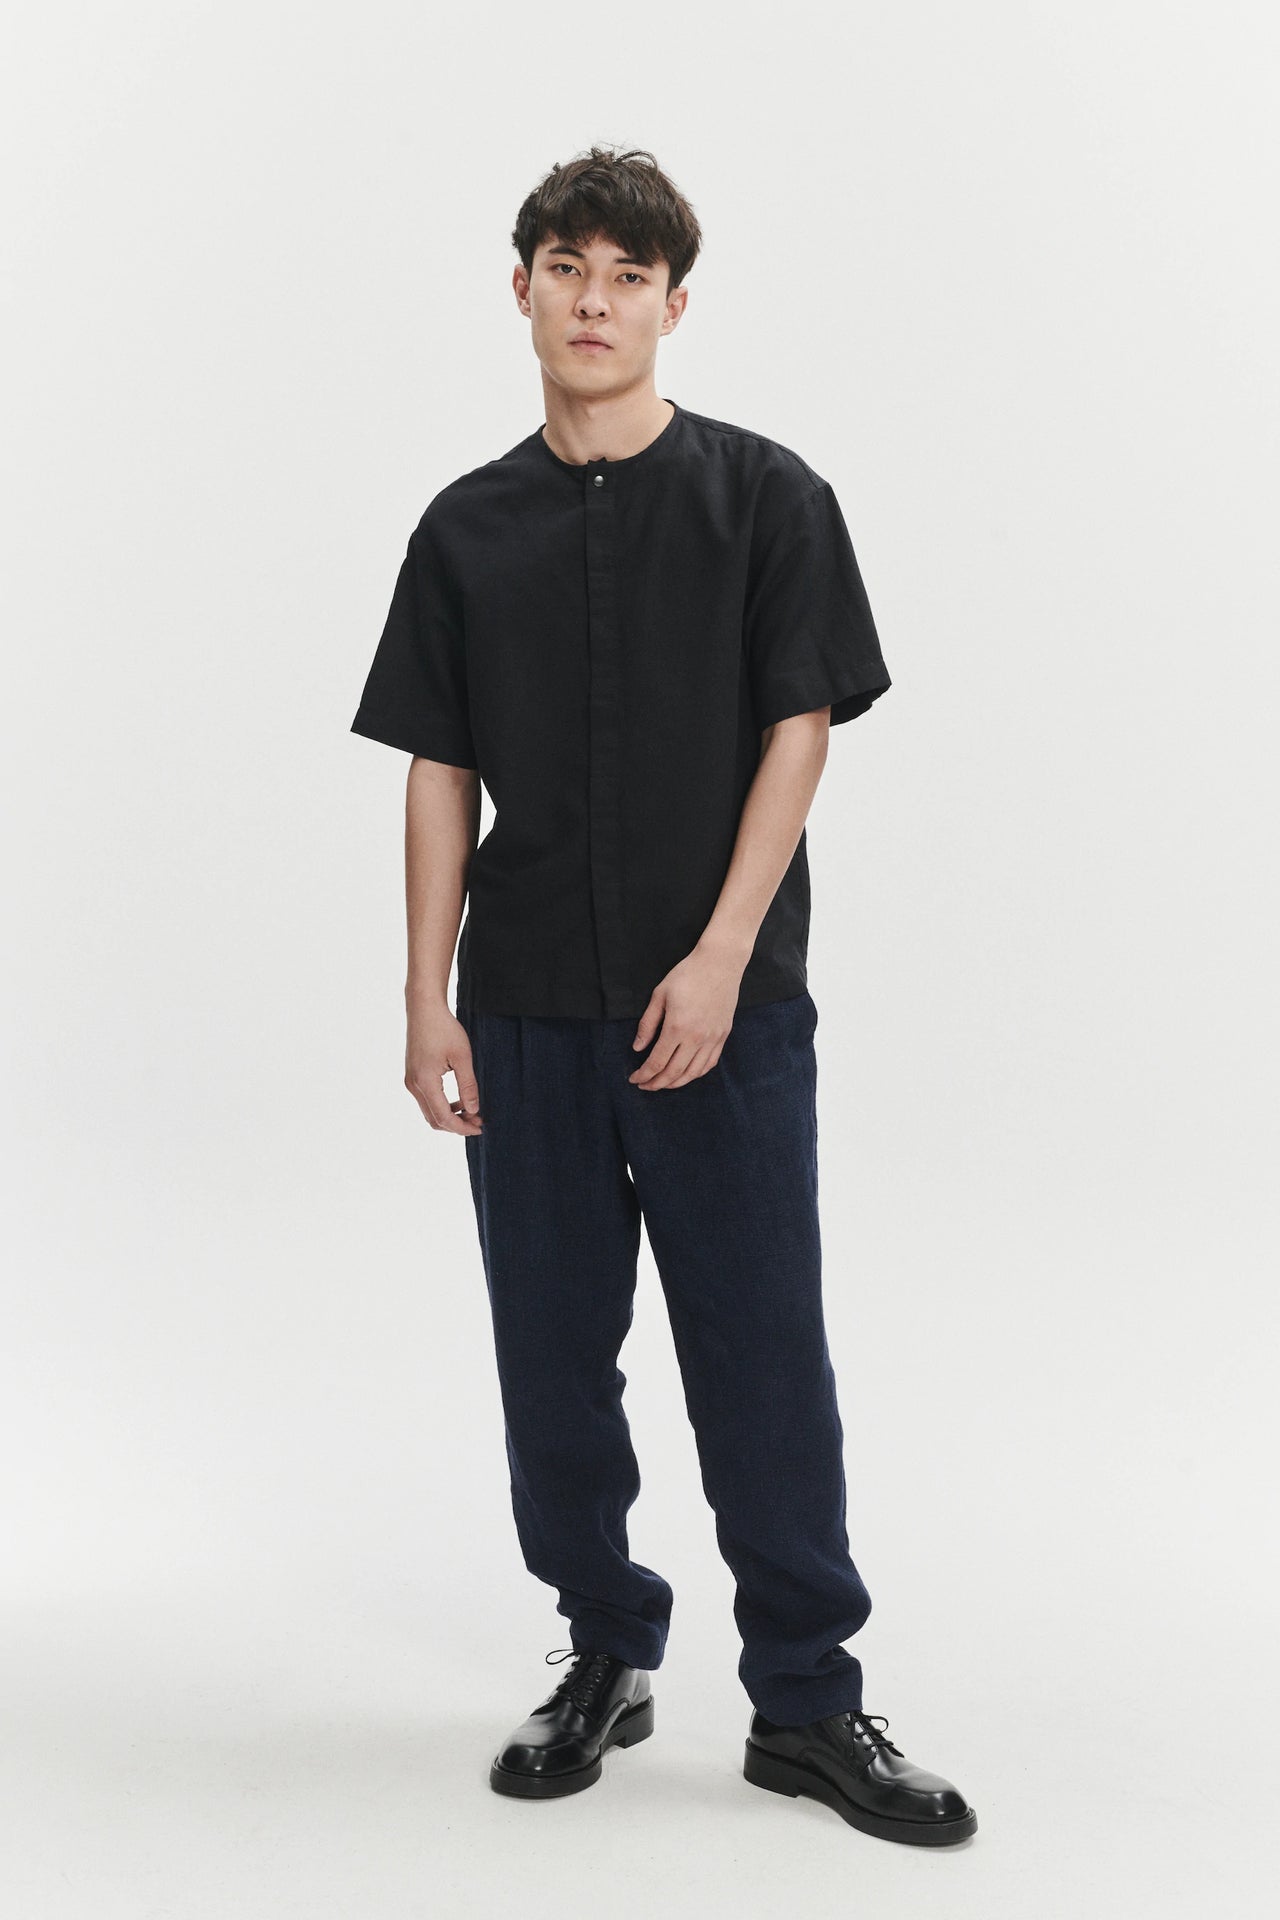 Short Sleeve Minimal Shirt in a Black Fine Portuguese Cotton and Linen